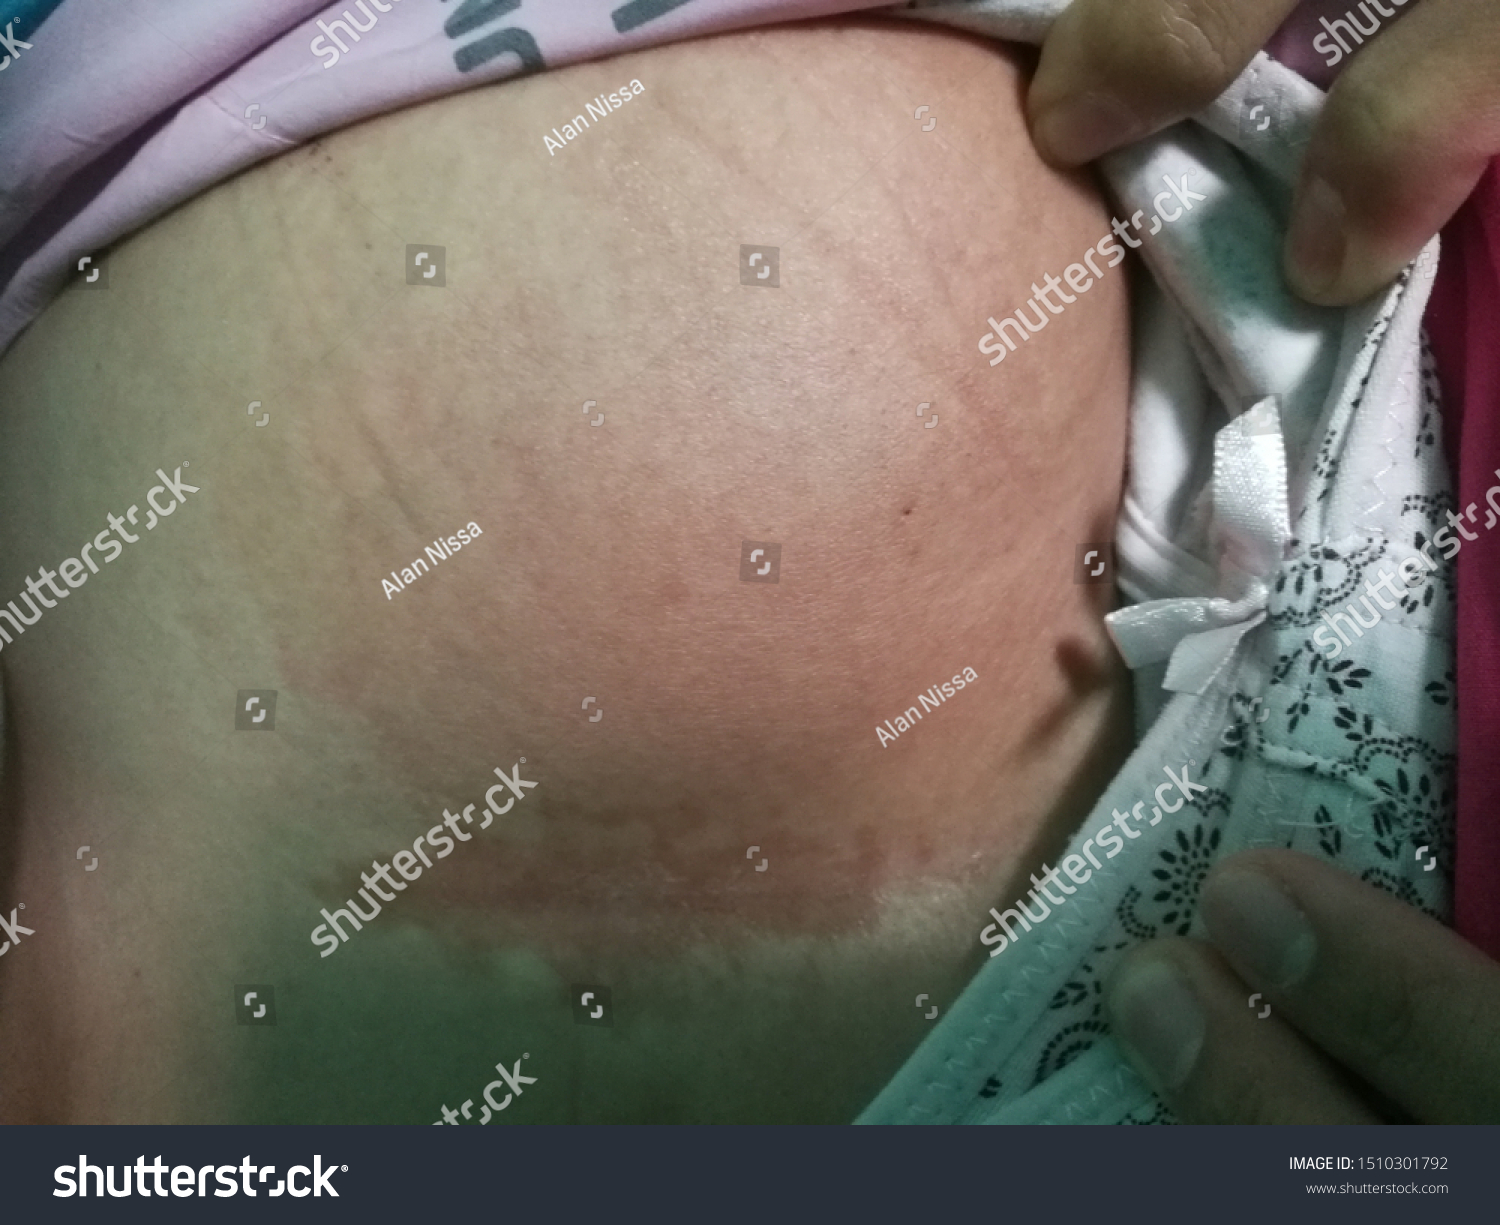 This patient is having anterior abdominal abscess presented with reddish discolouration of skin with lump #1510301792